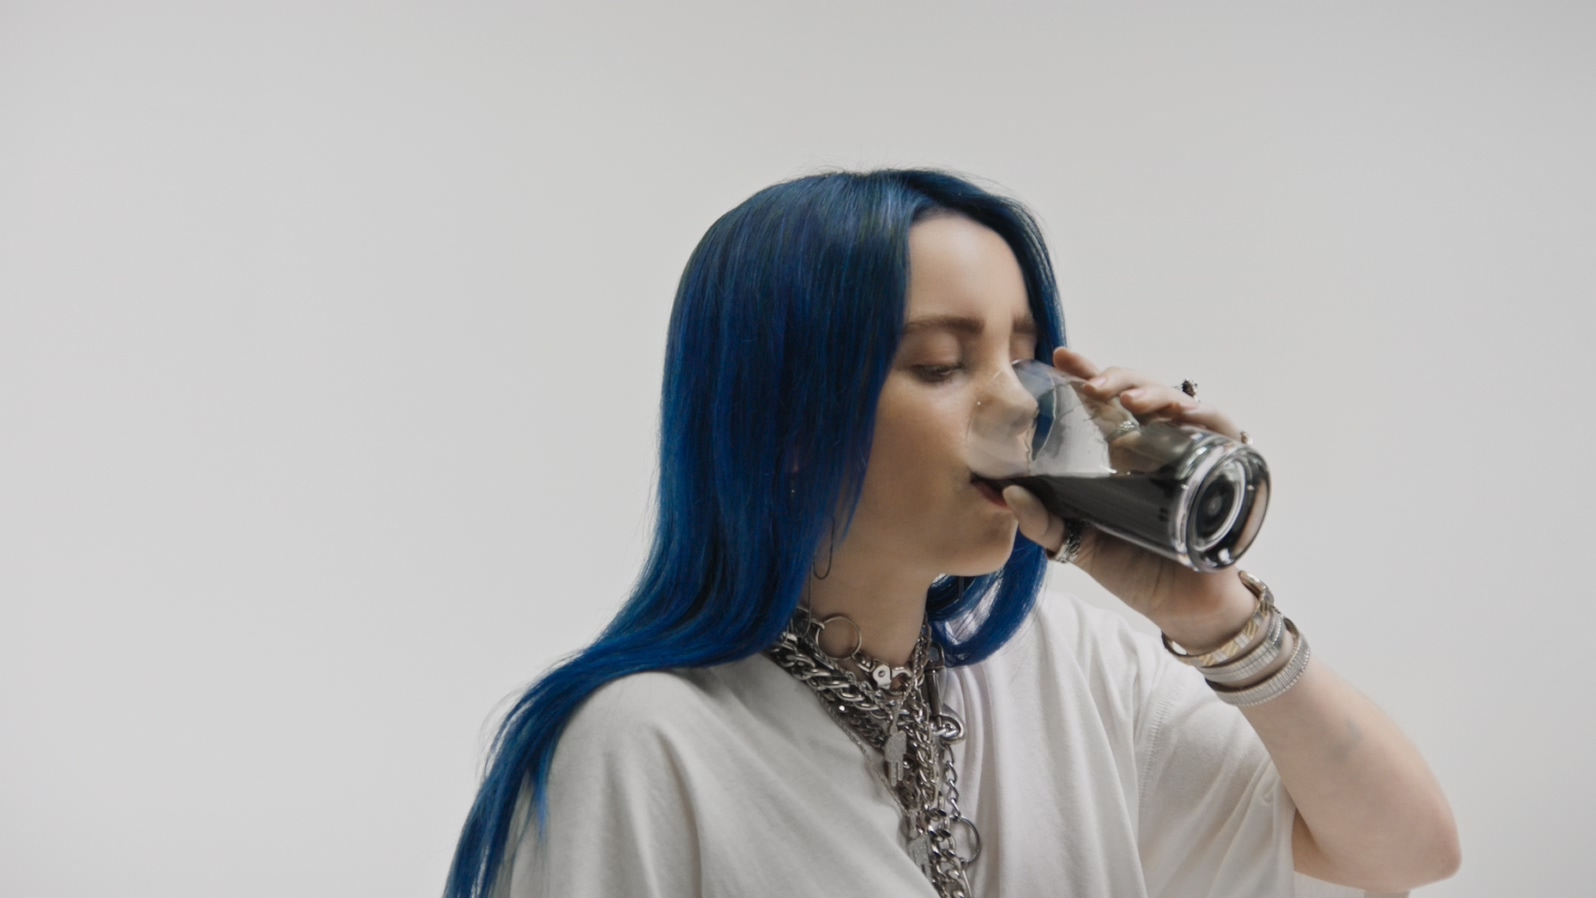 Billie Eilish - When The Party's Over (ProRes-Master-1080P).mov_20210812_200433.350